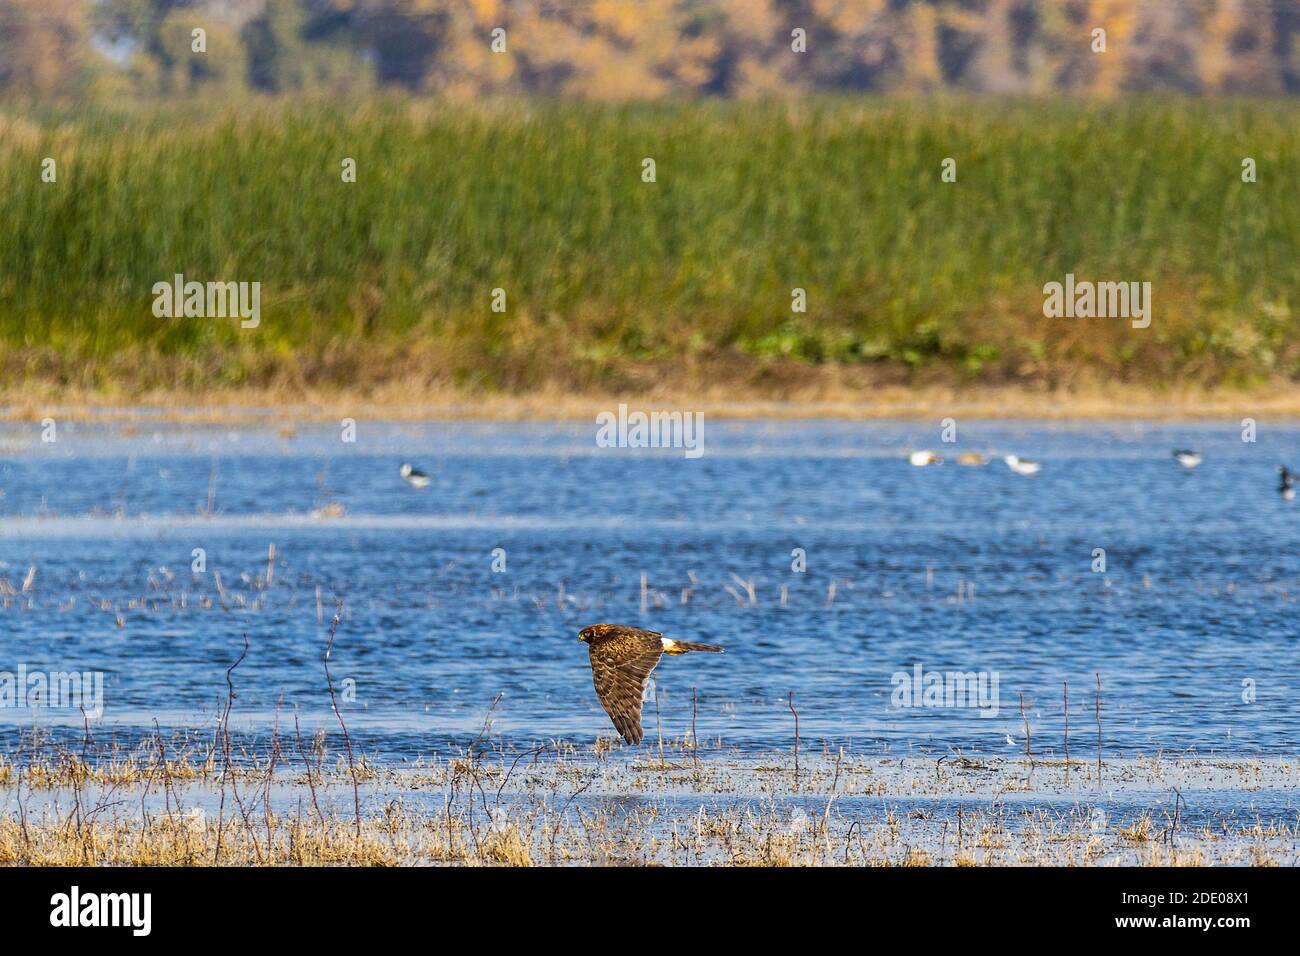 A Northern Harrier (Circus cyaneus) flies low at the Merced National Wildlife Refuge in the Central Valley of California USA Stock Photo